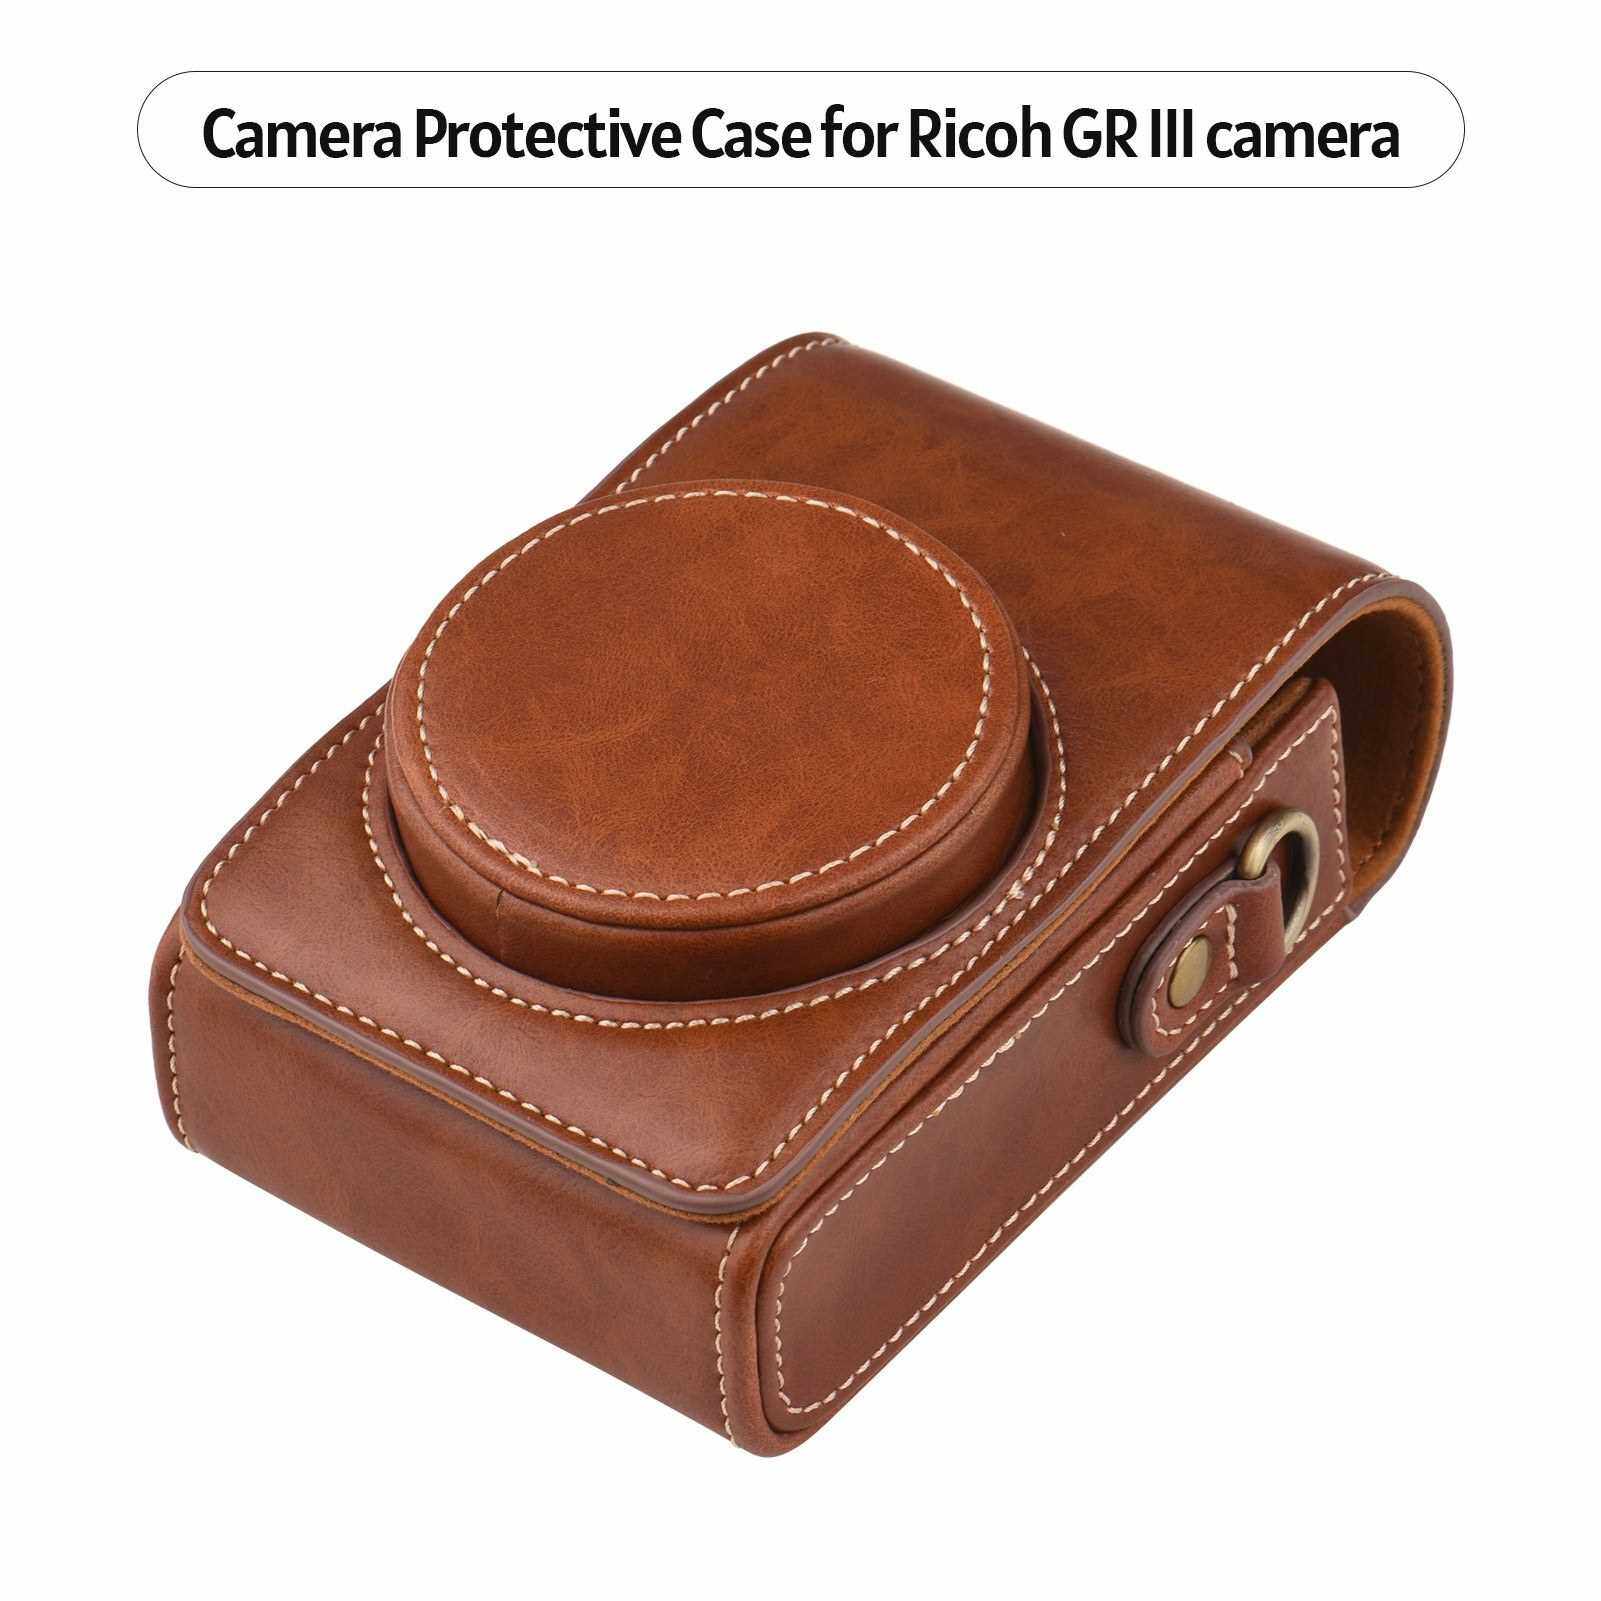 Portable Camera Case Carry Bag Synthetic Leather with Shoulder Strap Replacement for Sony RX100/ RX100 II/ RX100 III/ RX100 IV/ RX100V/ RX100 VI/ RX100 VII/ ZV1 for Ricoh GR2/ GR3 (Brown)